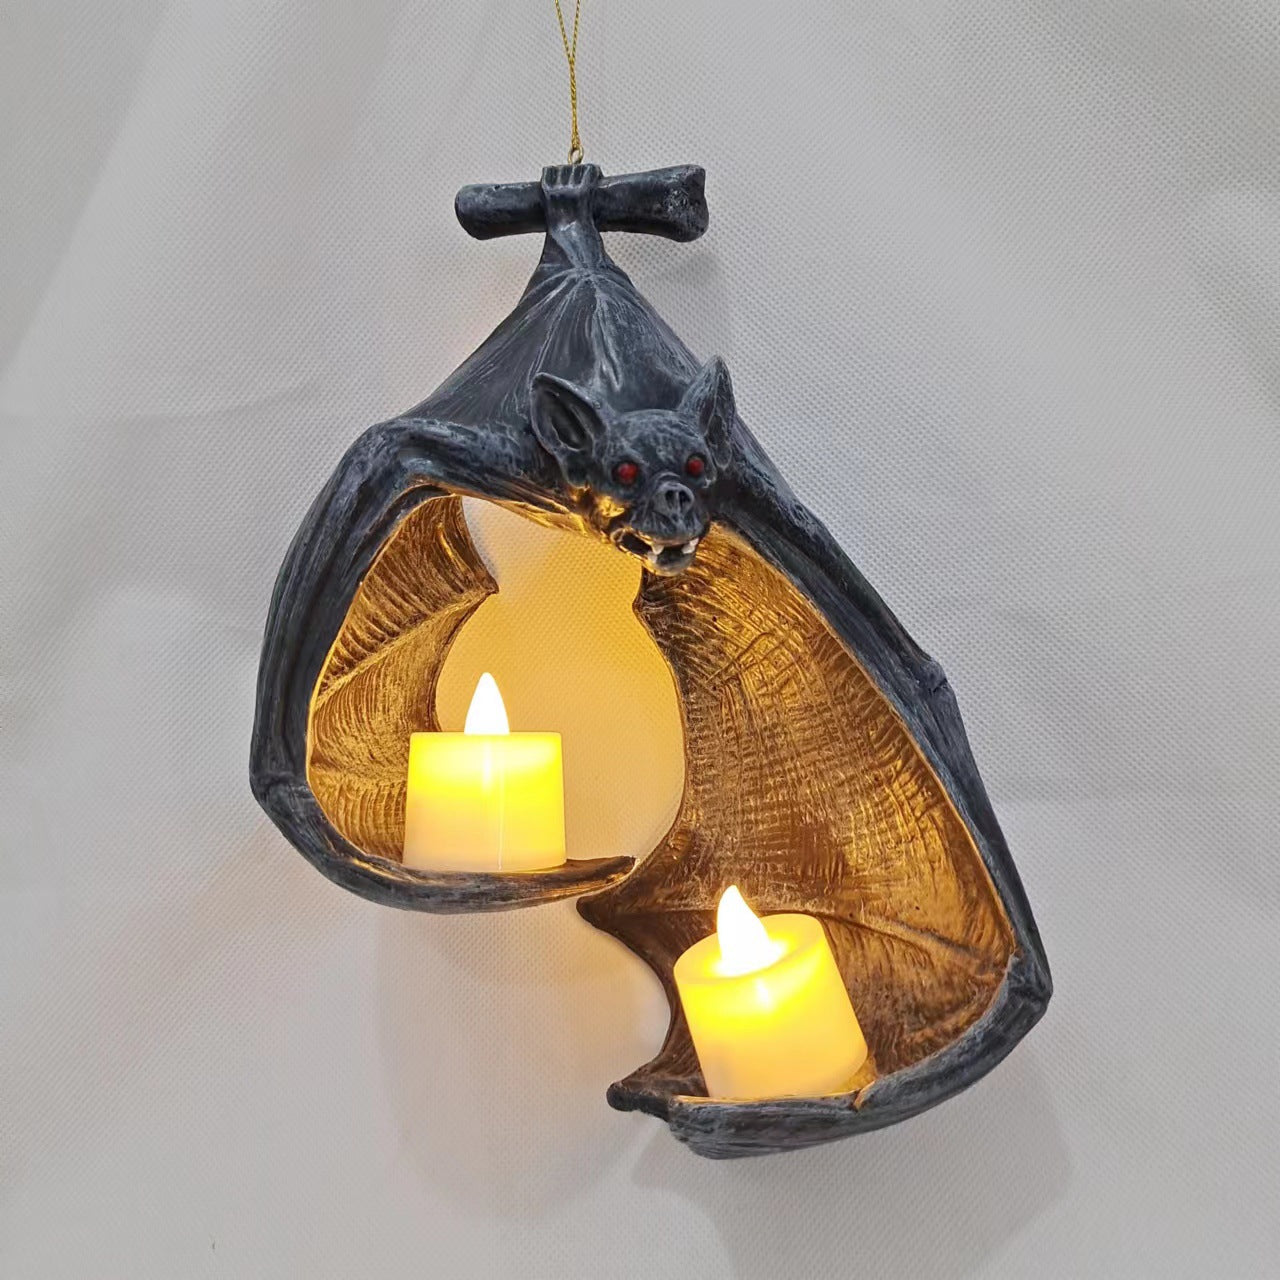 New Ghost Bat LED Wall Candle Holder Halloween Resin Ornament